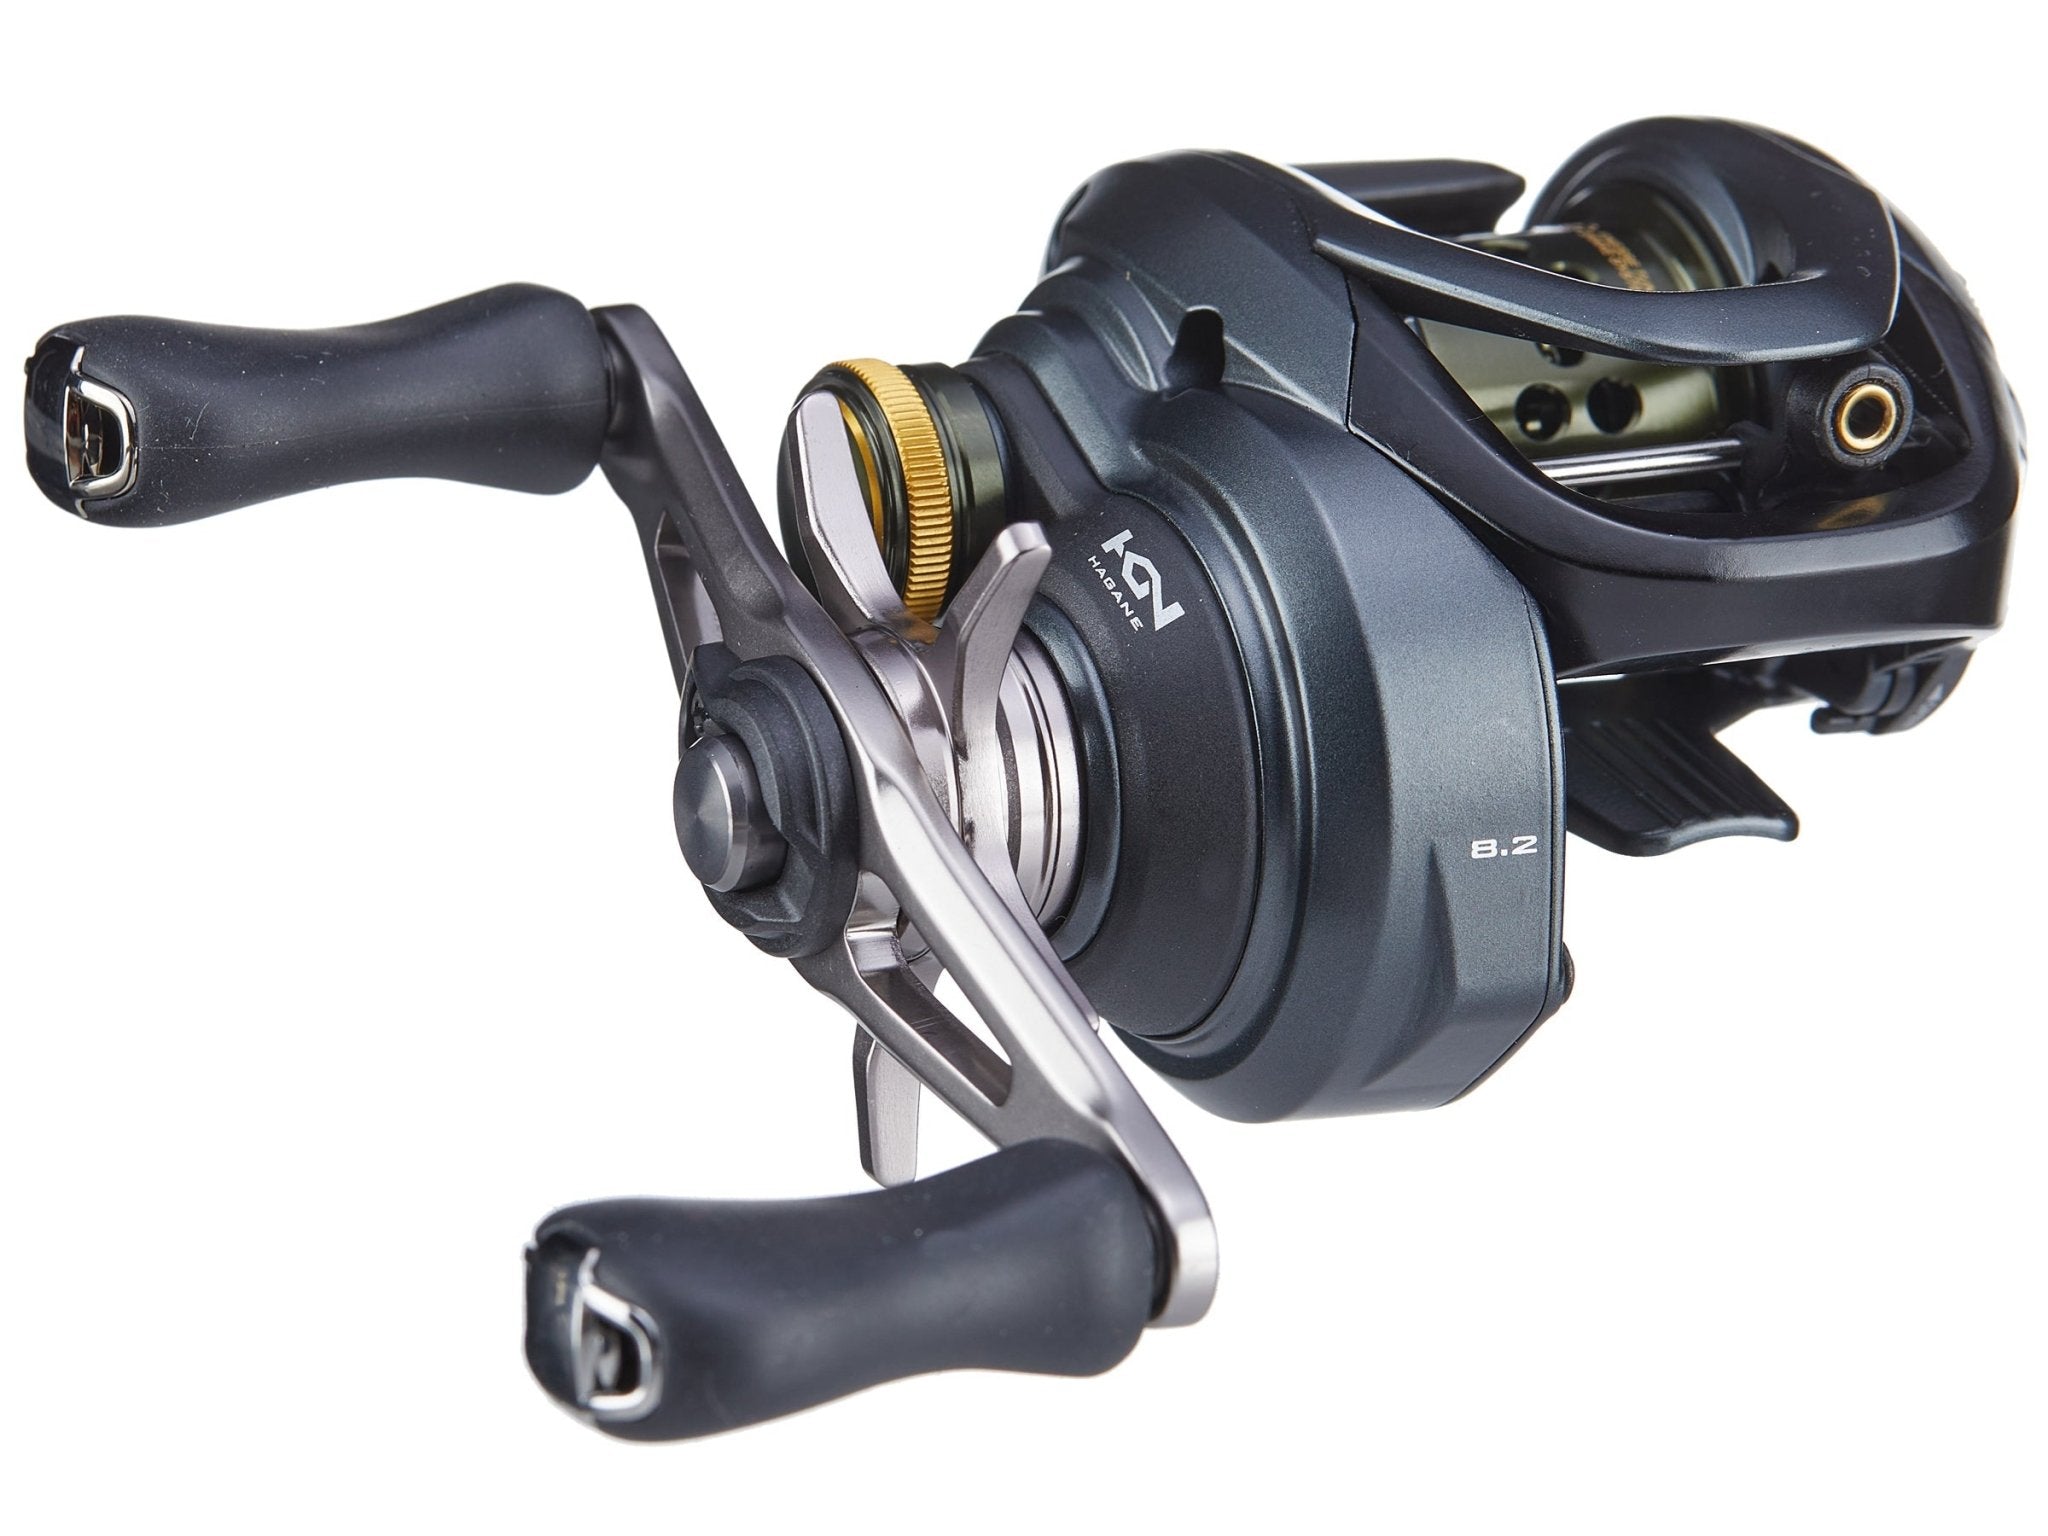 Shimano Reels for sale in Cookstown, New Jersey, Facebook Marketplace